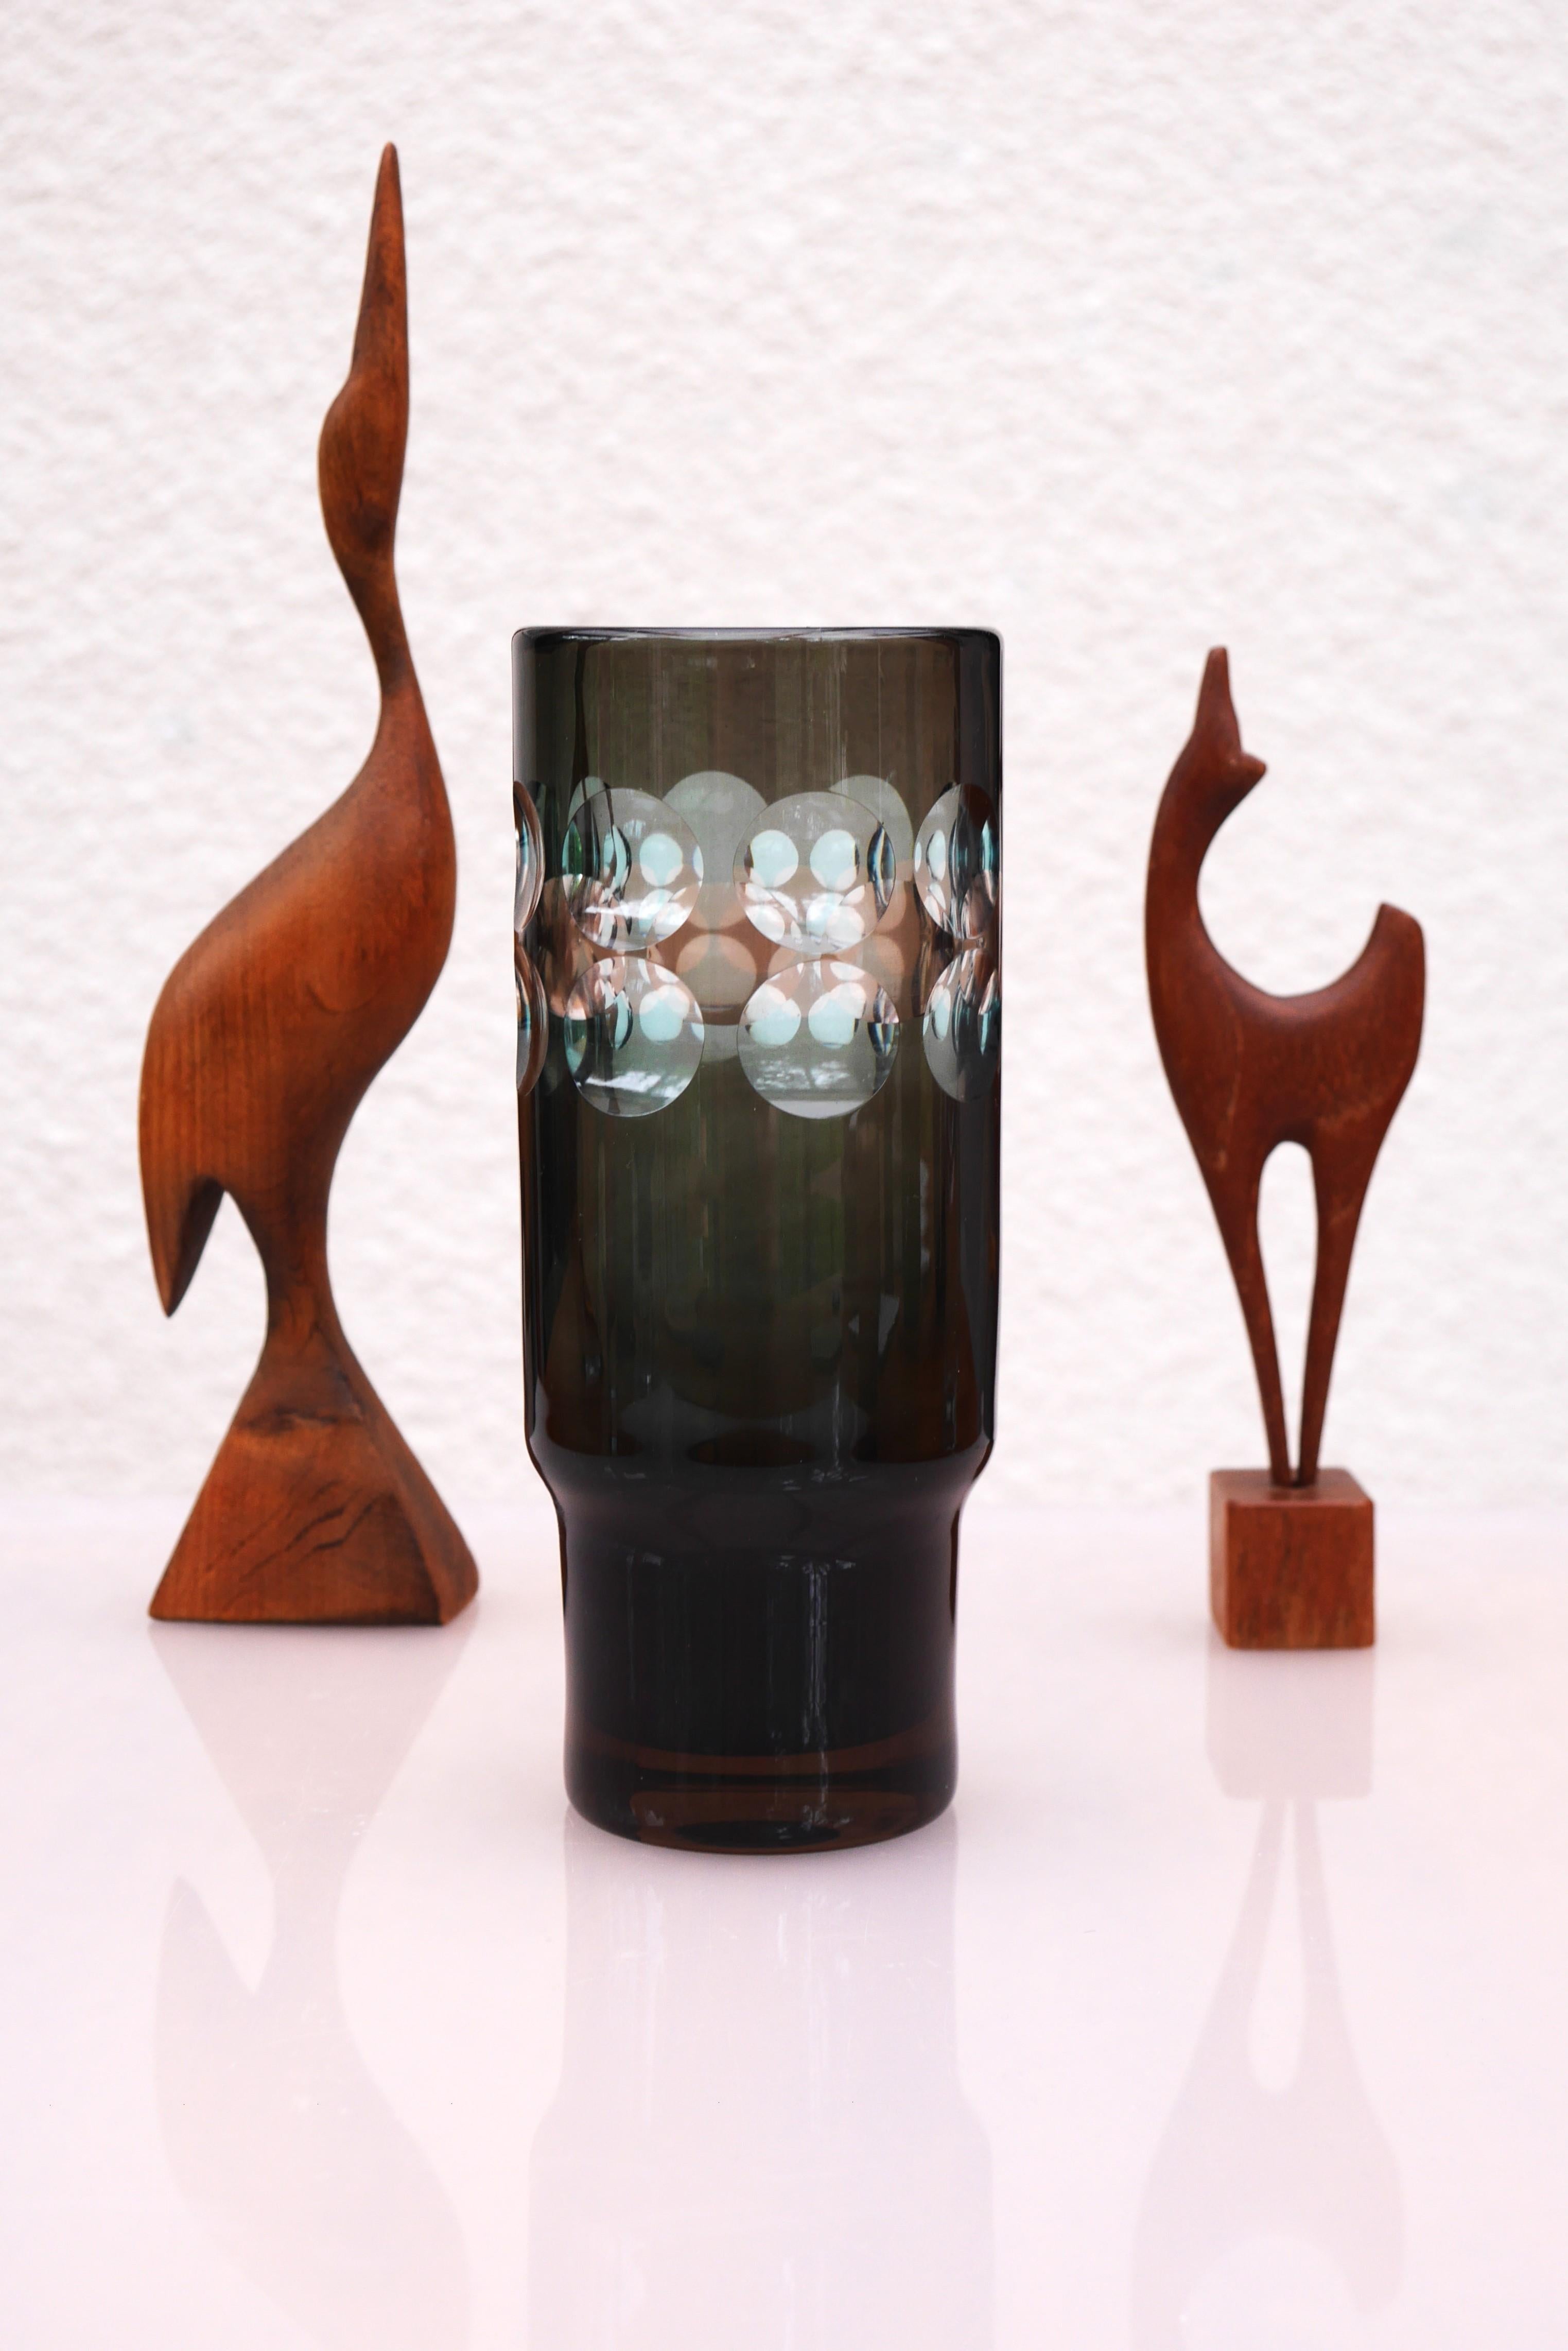 A very special and sophisticated signed and handmade glass vase made by the talented designer Ove Sandberg for Kosta Boda, Sweden. His work always has a special edge to them. The vase is simple in the form in a dark green color, with several